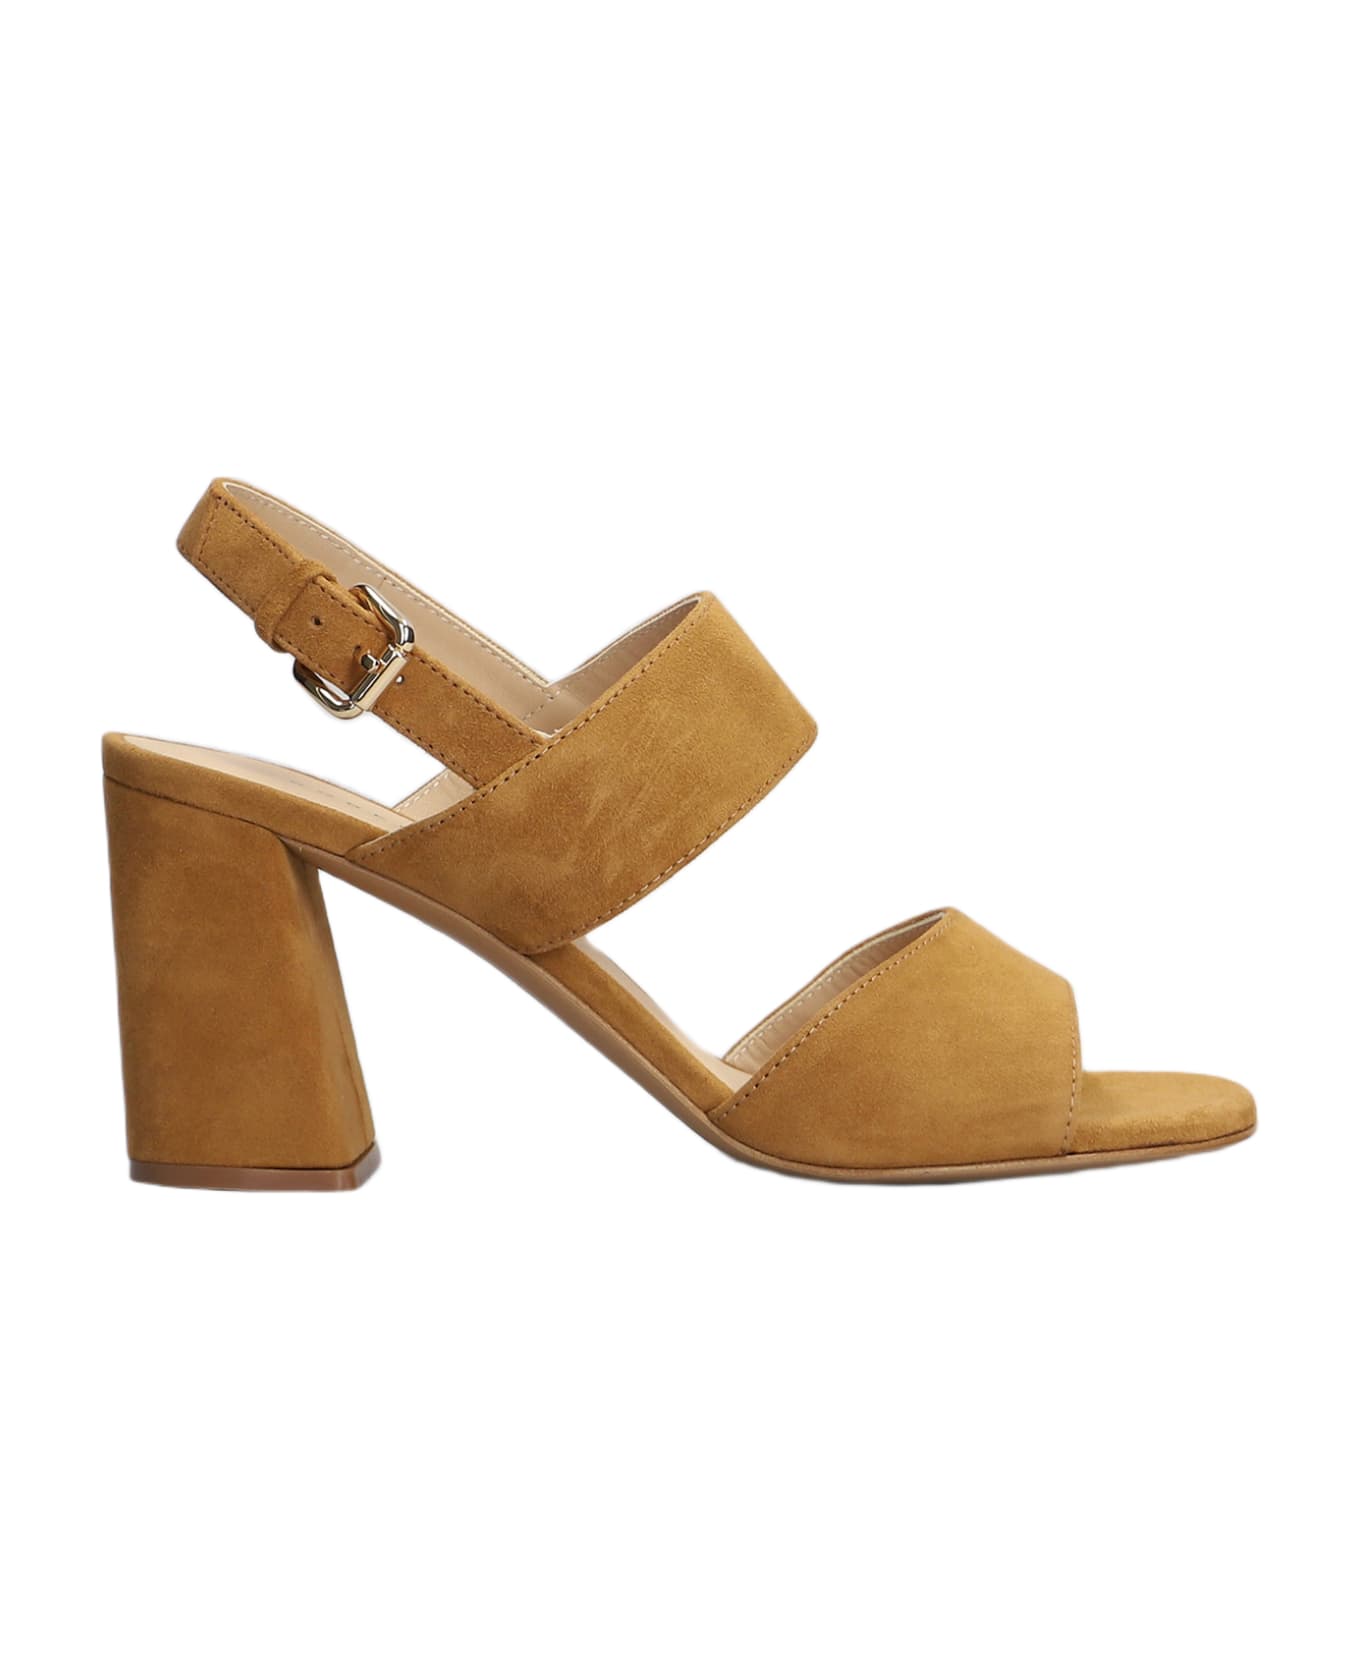 Roberto Festa Bucaneve Sandals In Leather Color Suede - leather color